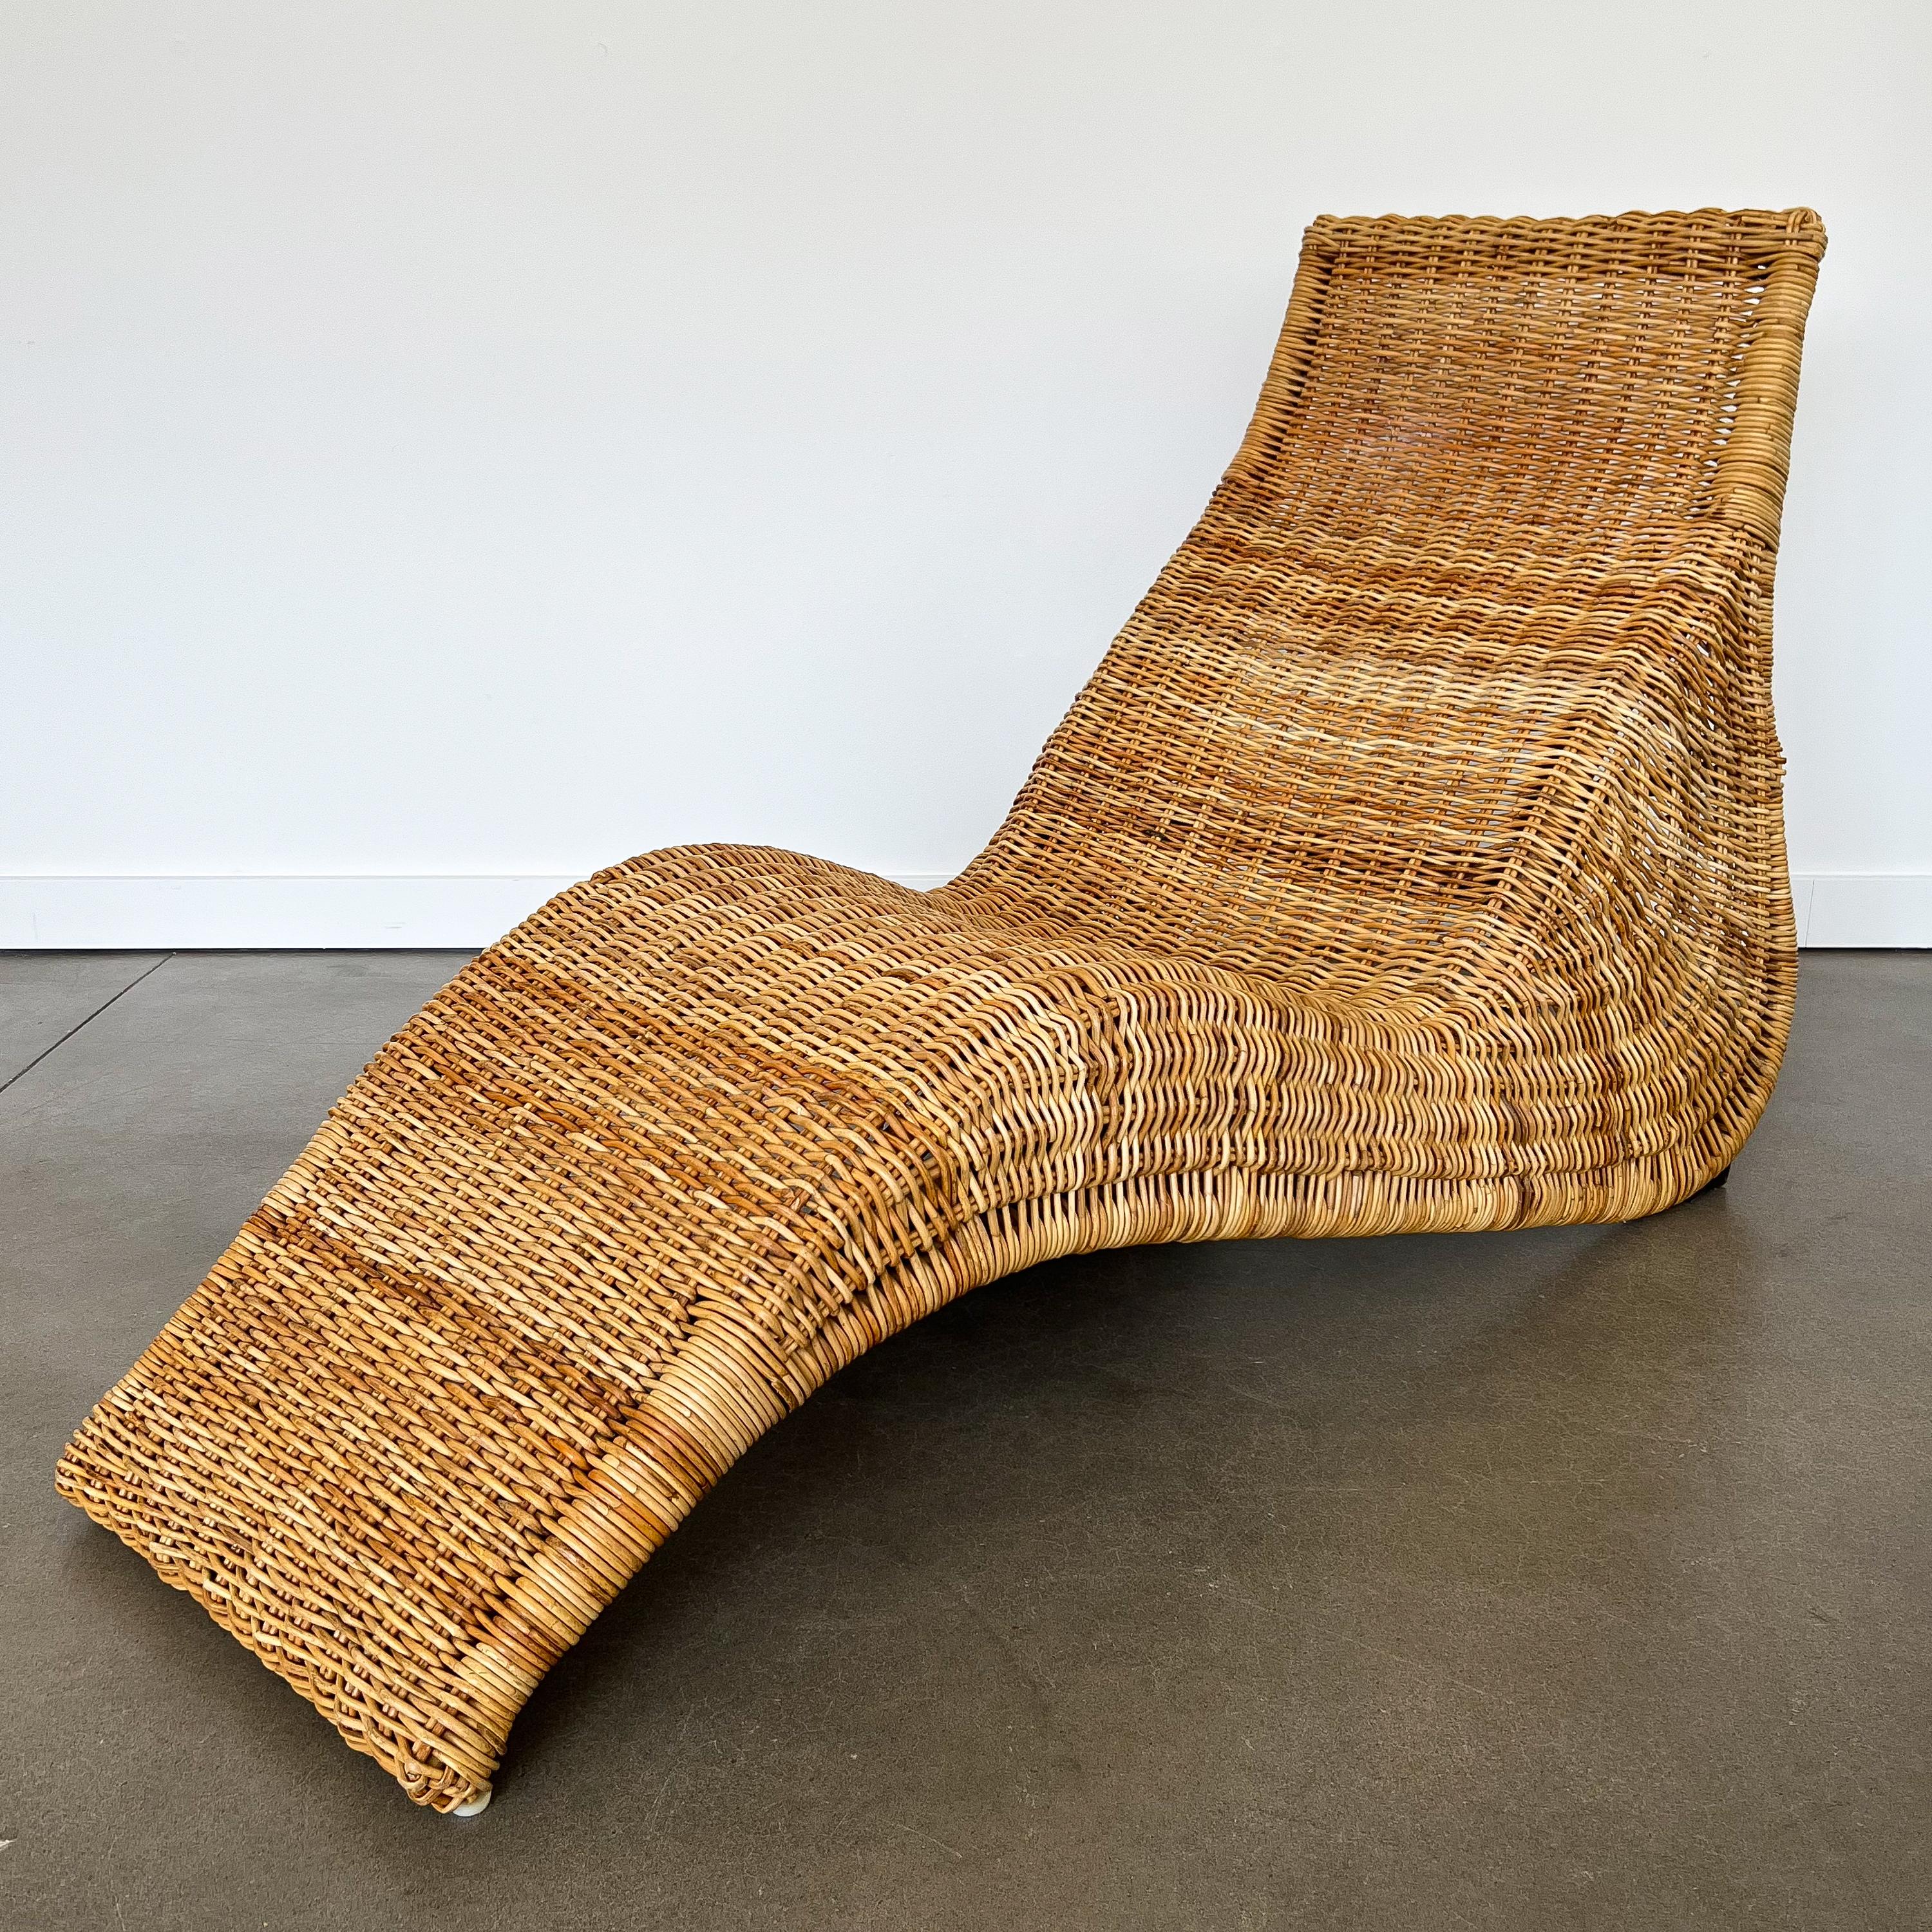 Karlskrona Rattan Wicker Chaise Lounge by Karl Malmvall for Ikea 2